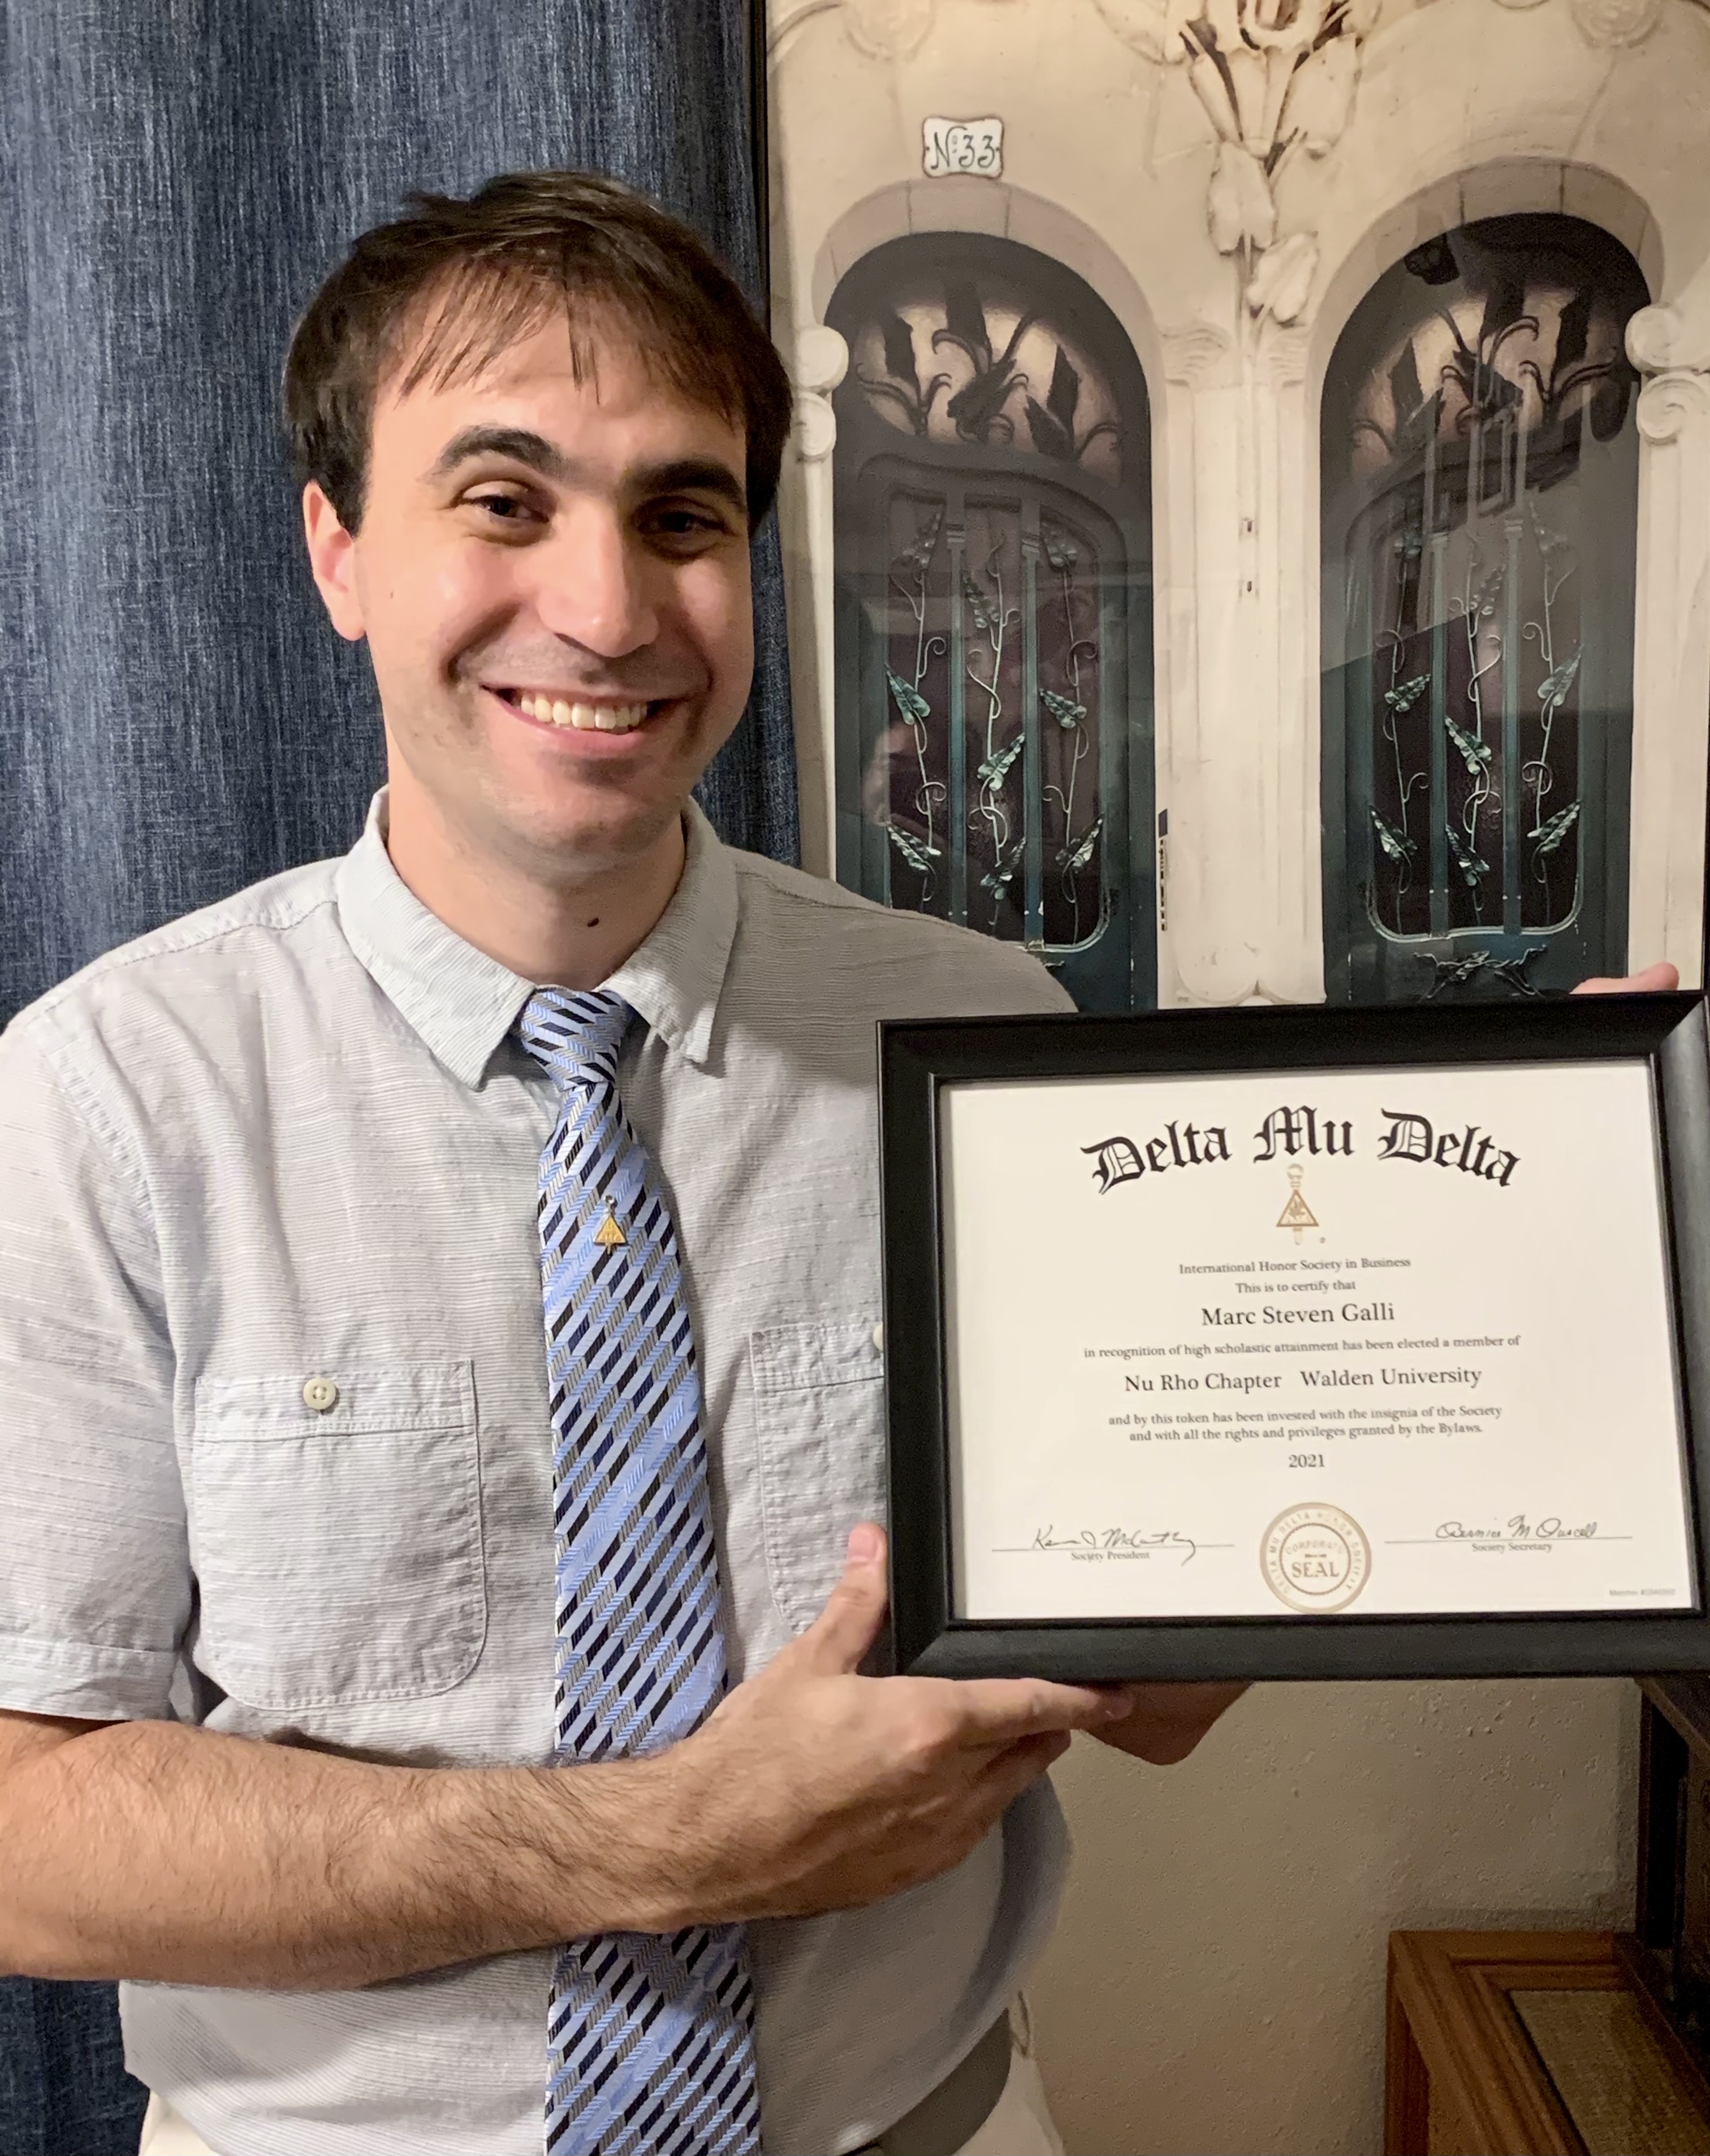 Marc Galli, Certificated by Delta Mu Delta International Honor Society in Business